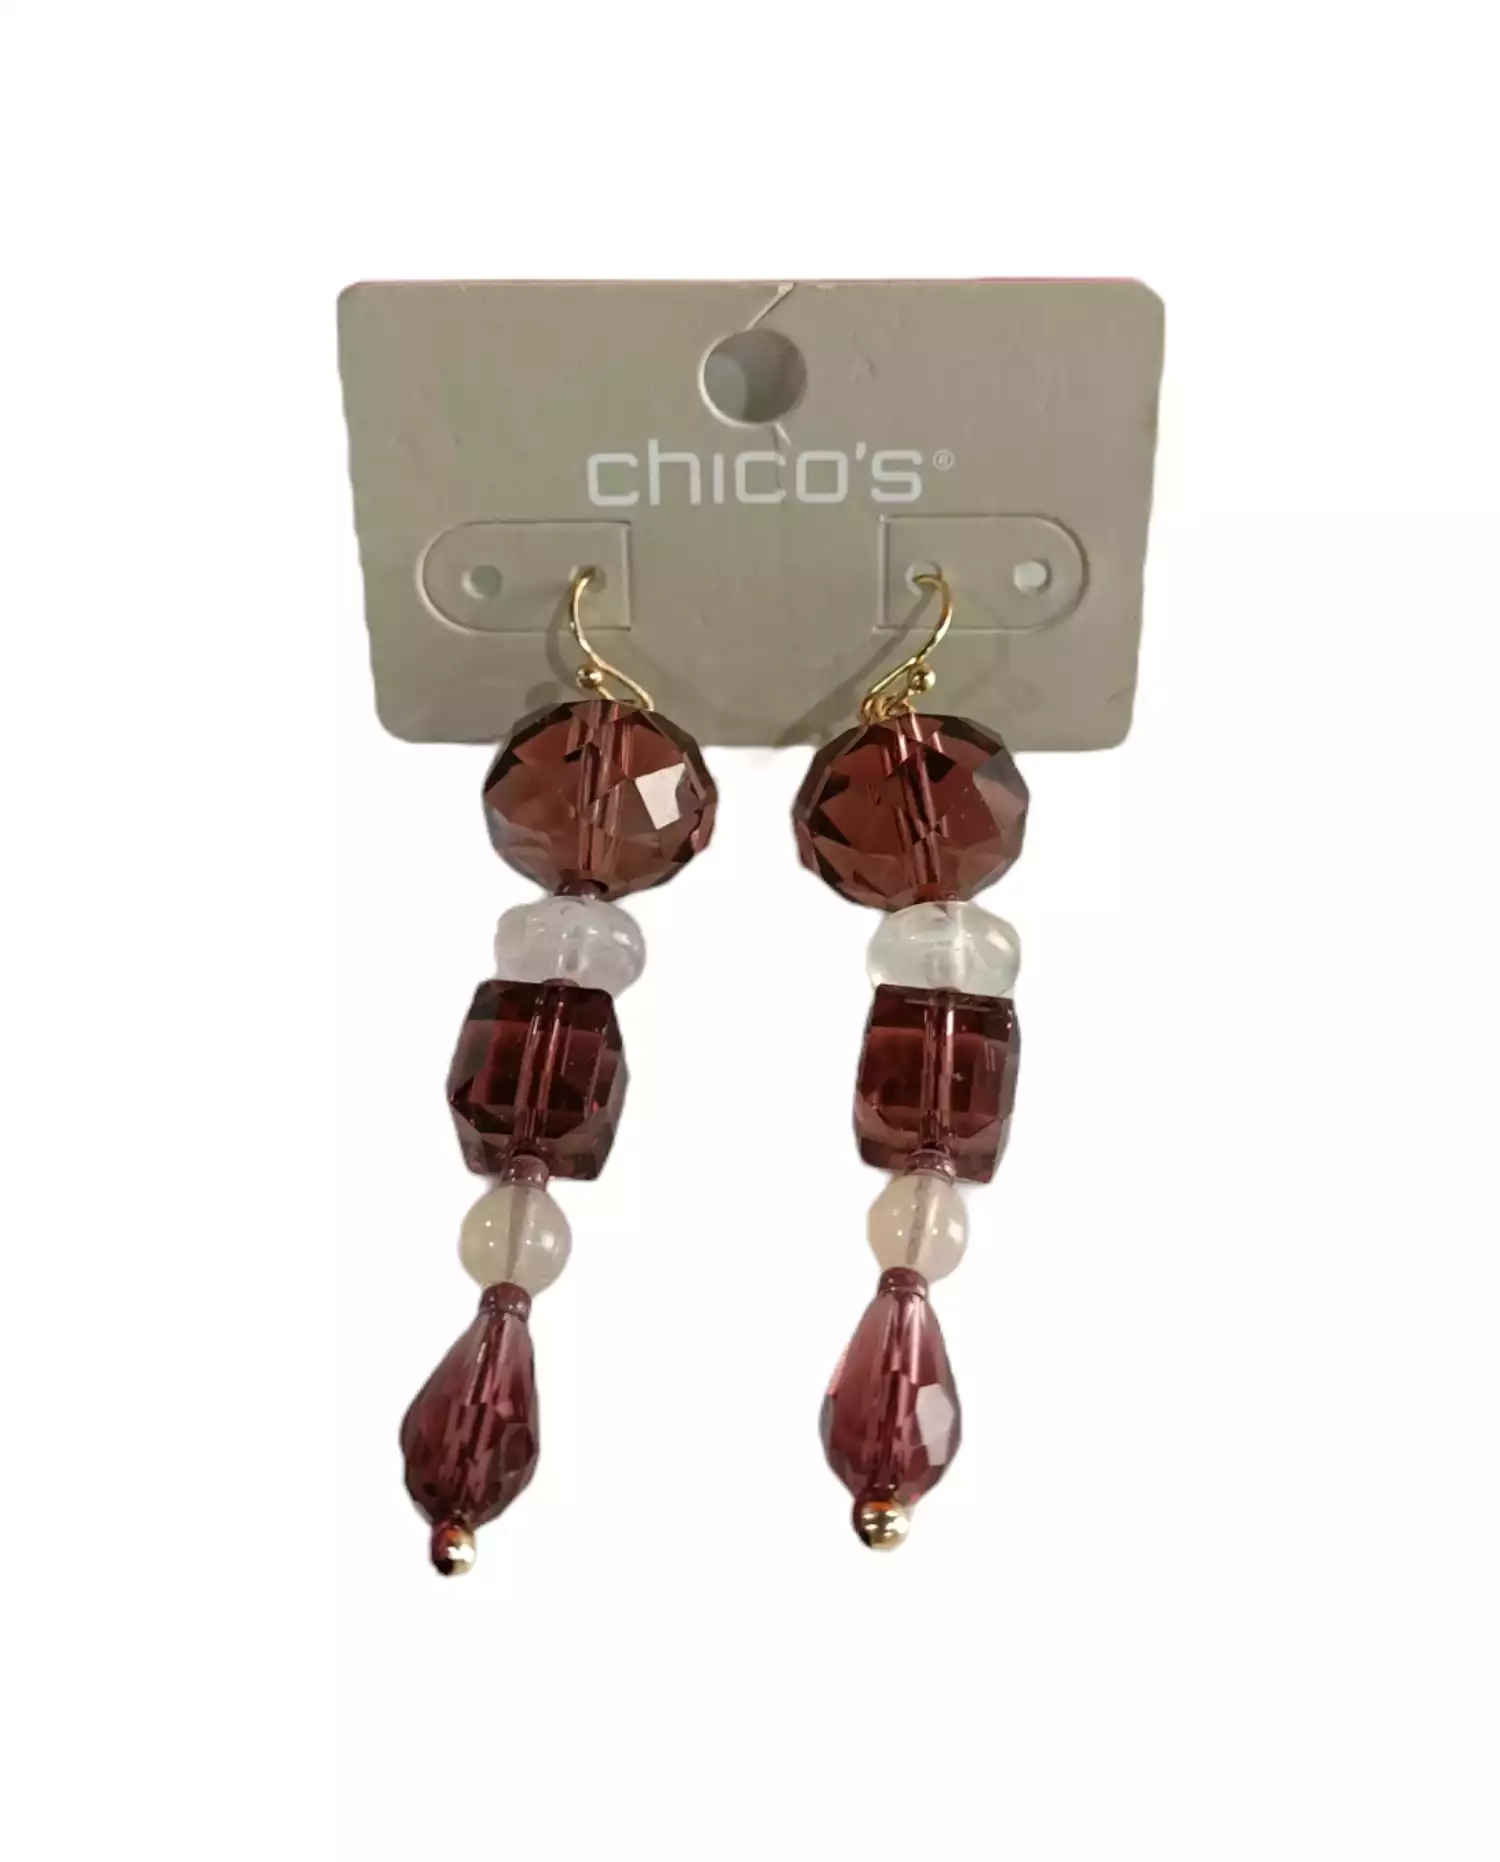 Earrings by Chicos